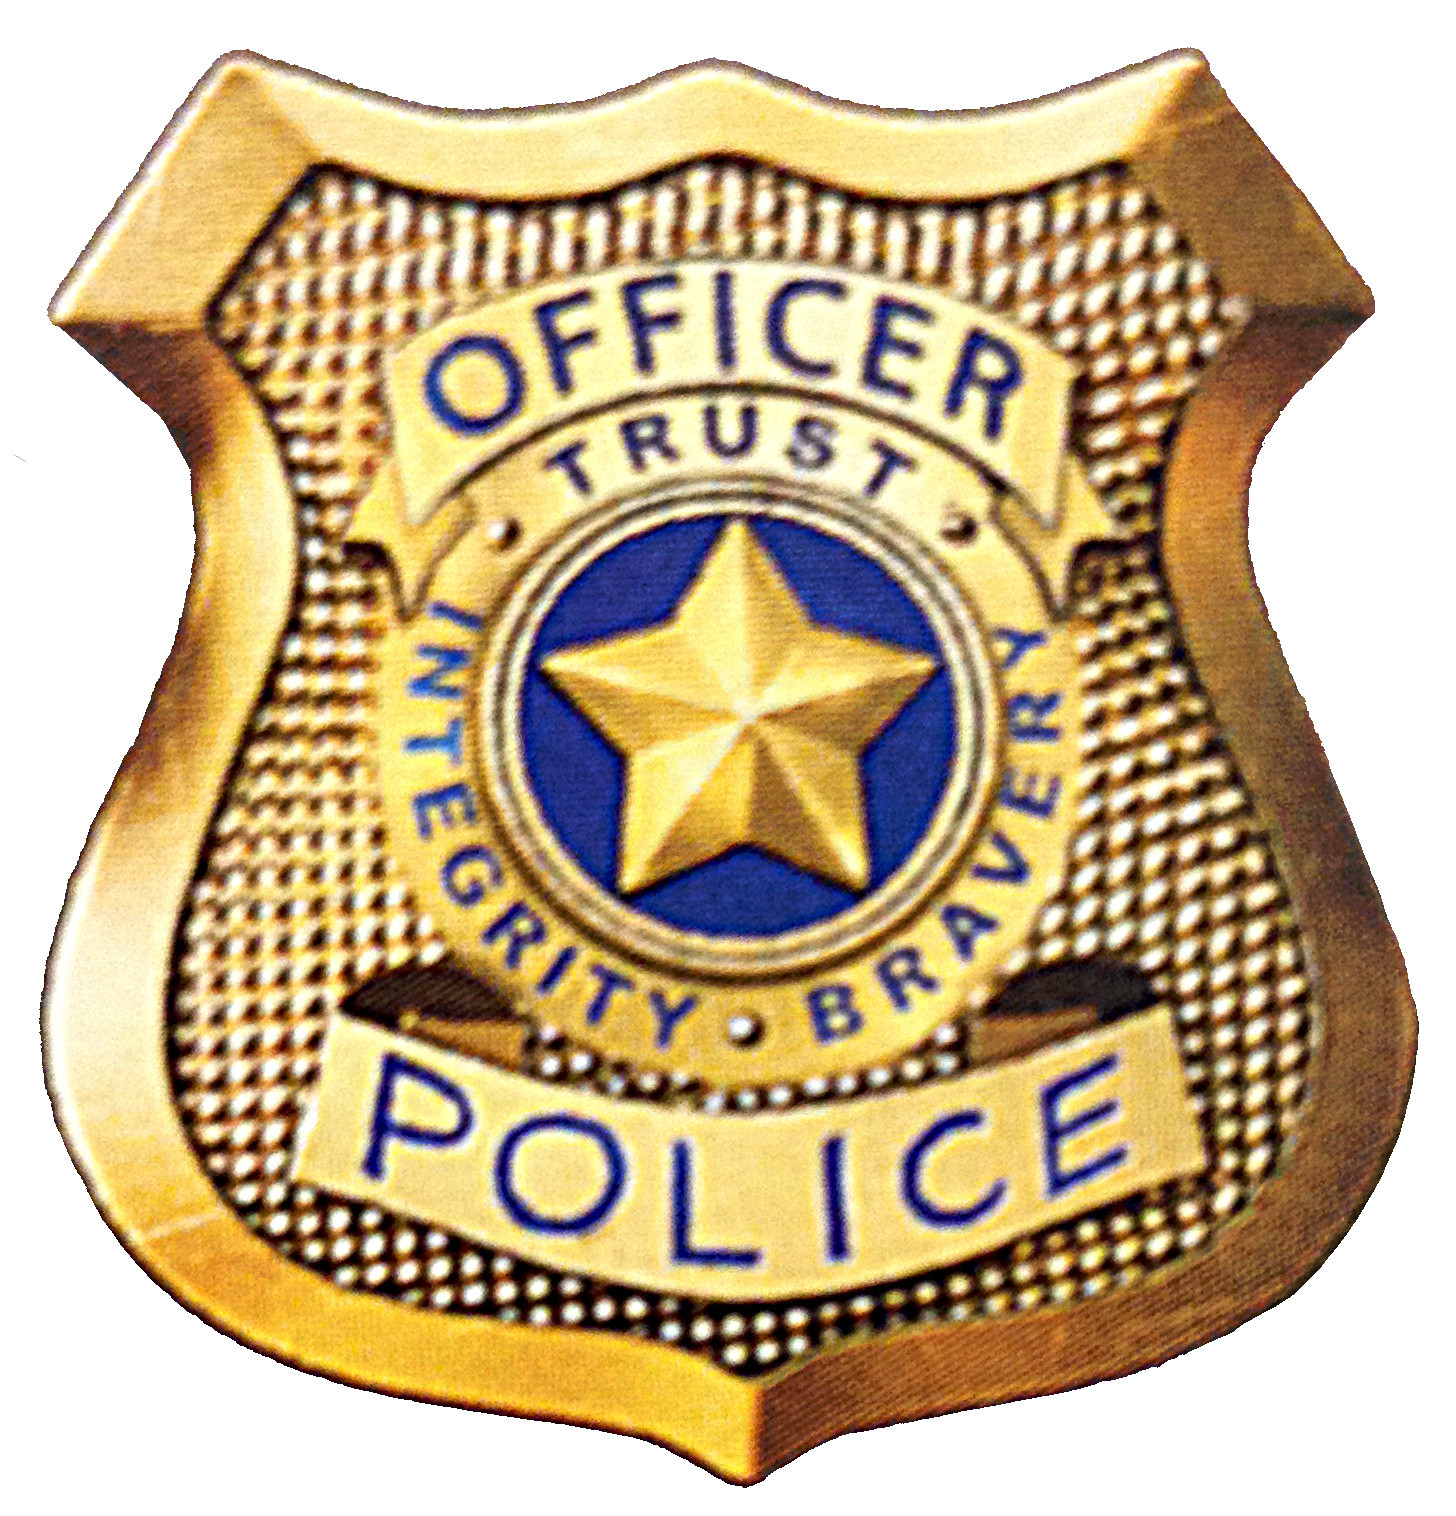 Lively jkfloodrelief org exciting. Badge clipart police officer